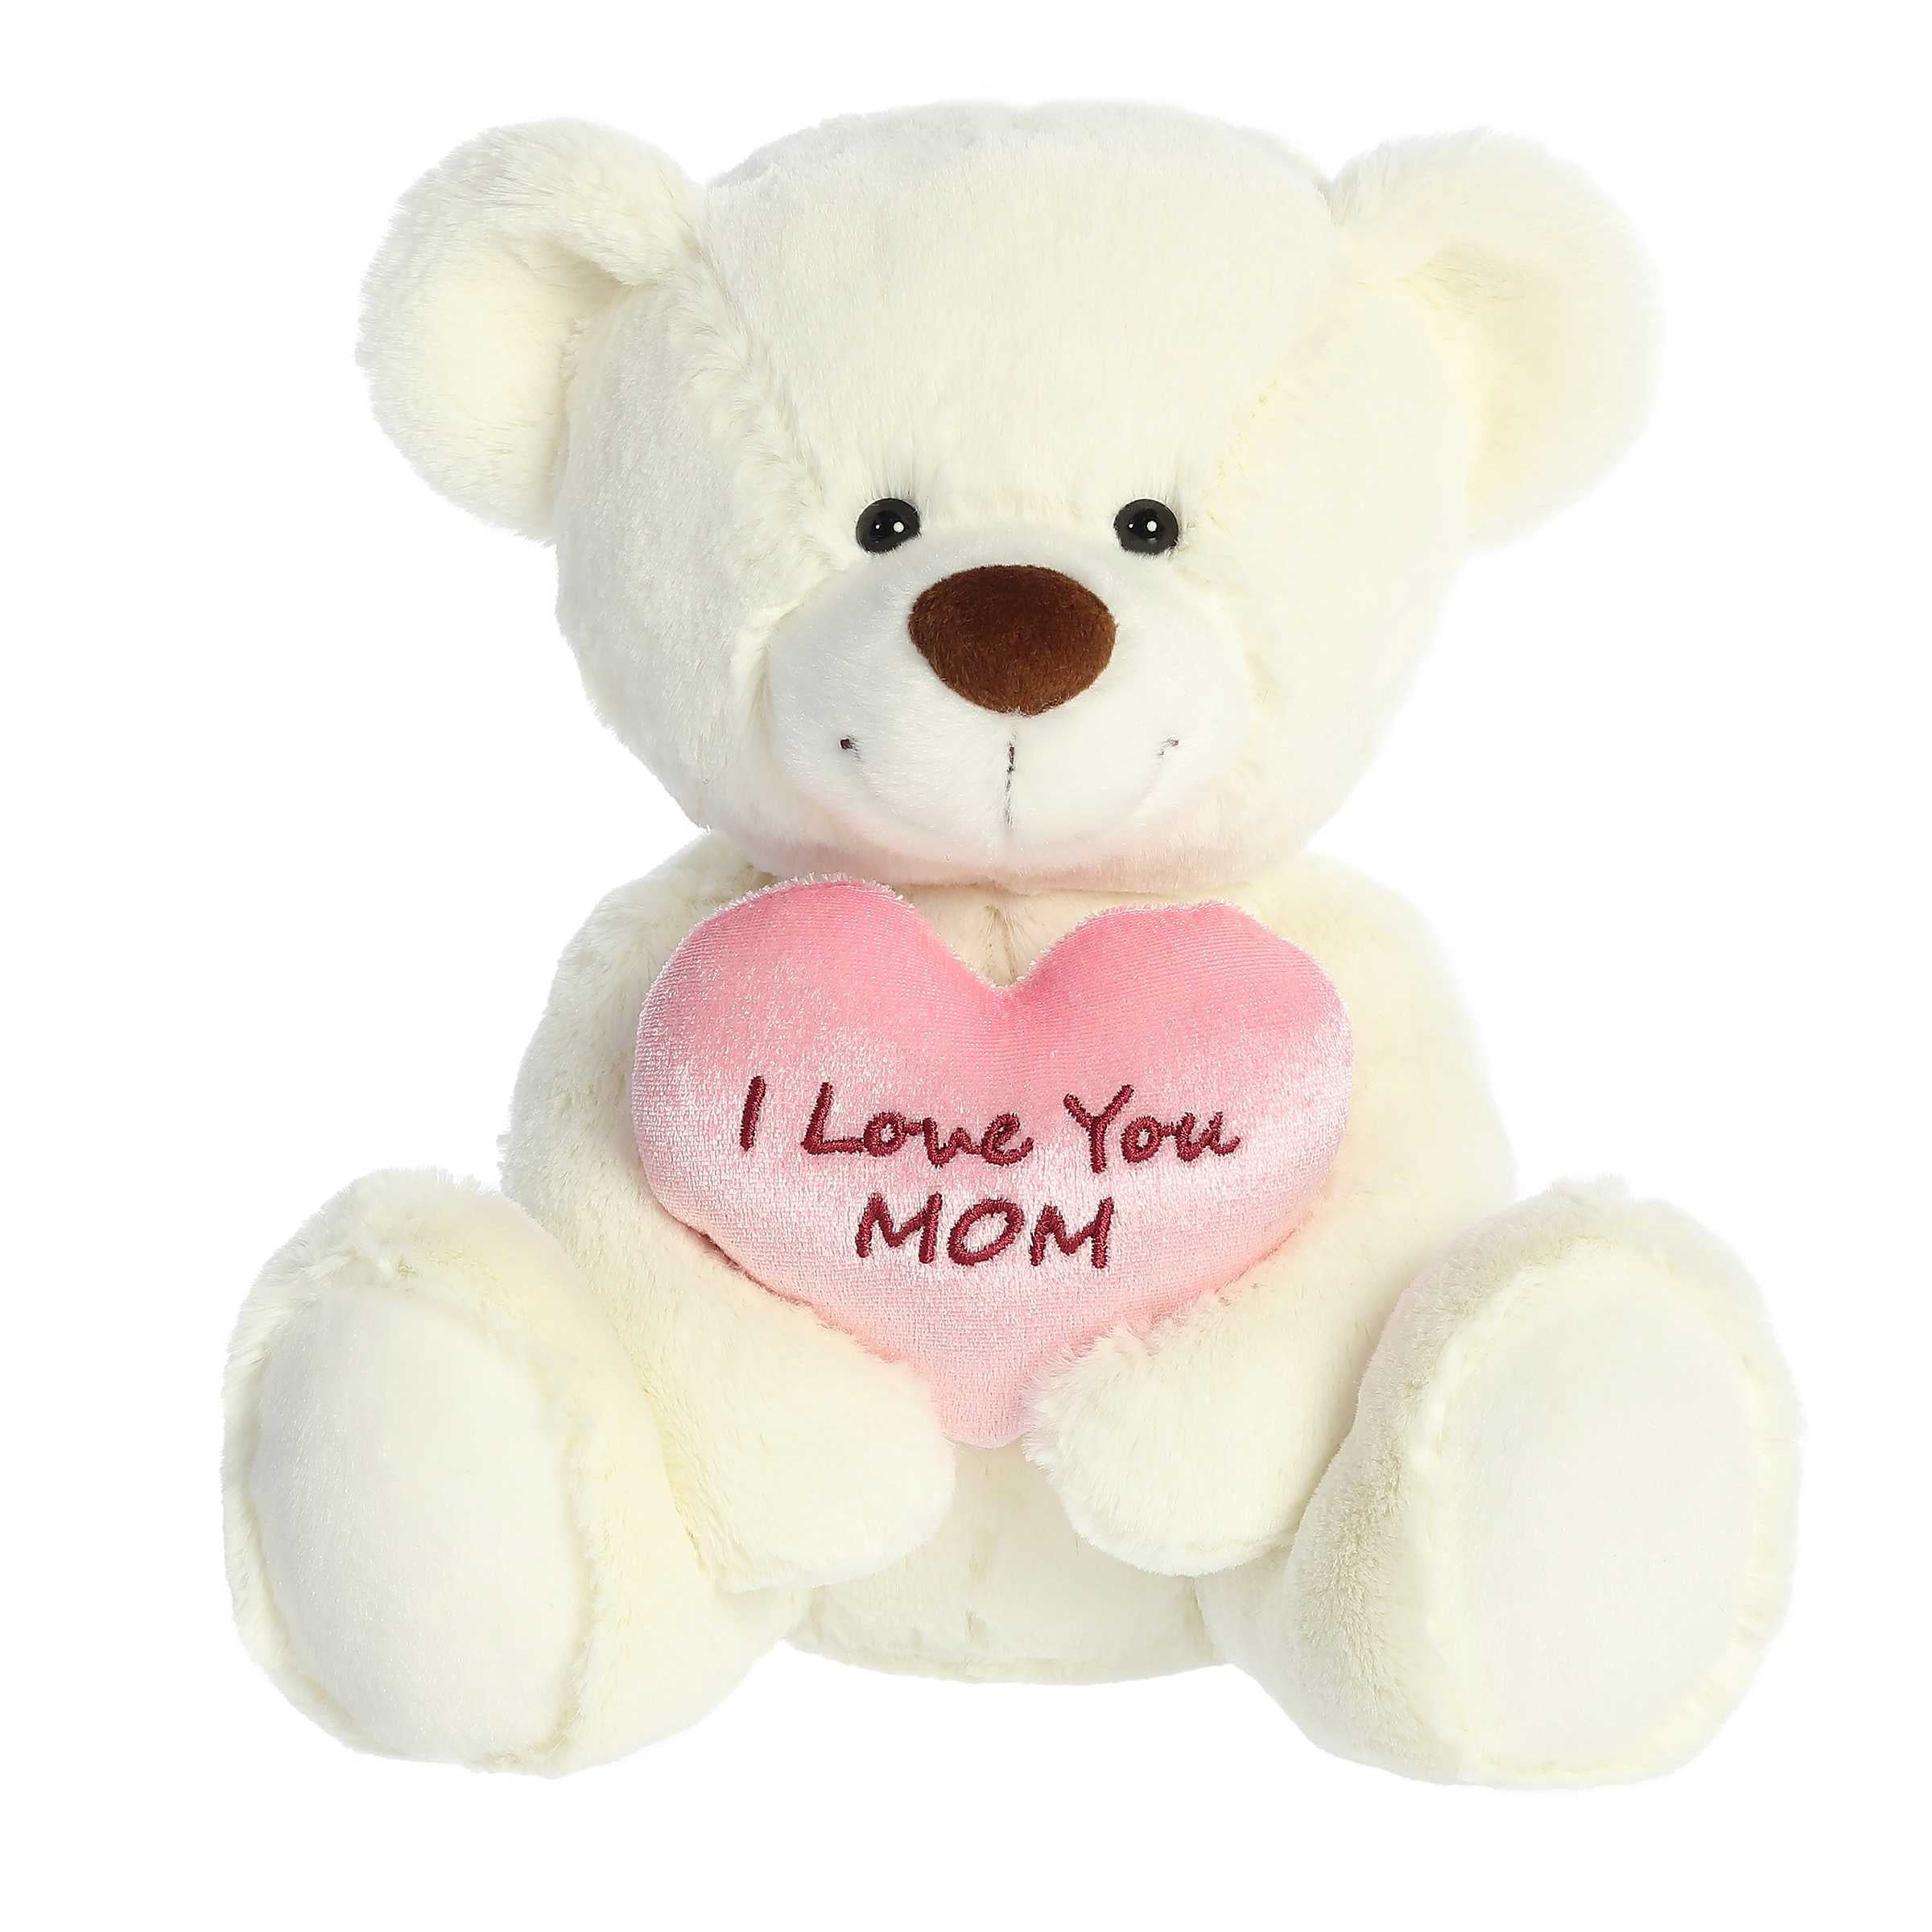 I Love You Mom Bear plush by Aurora stuffed animals, holding a plush heart, ideal Mother's Day gift